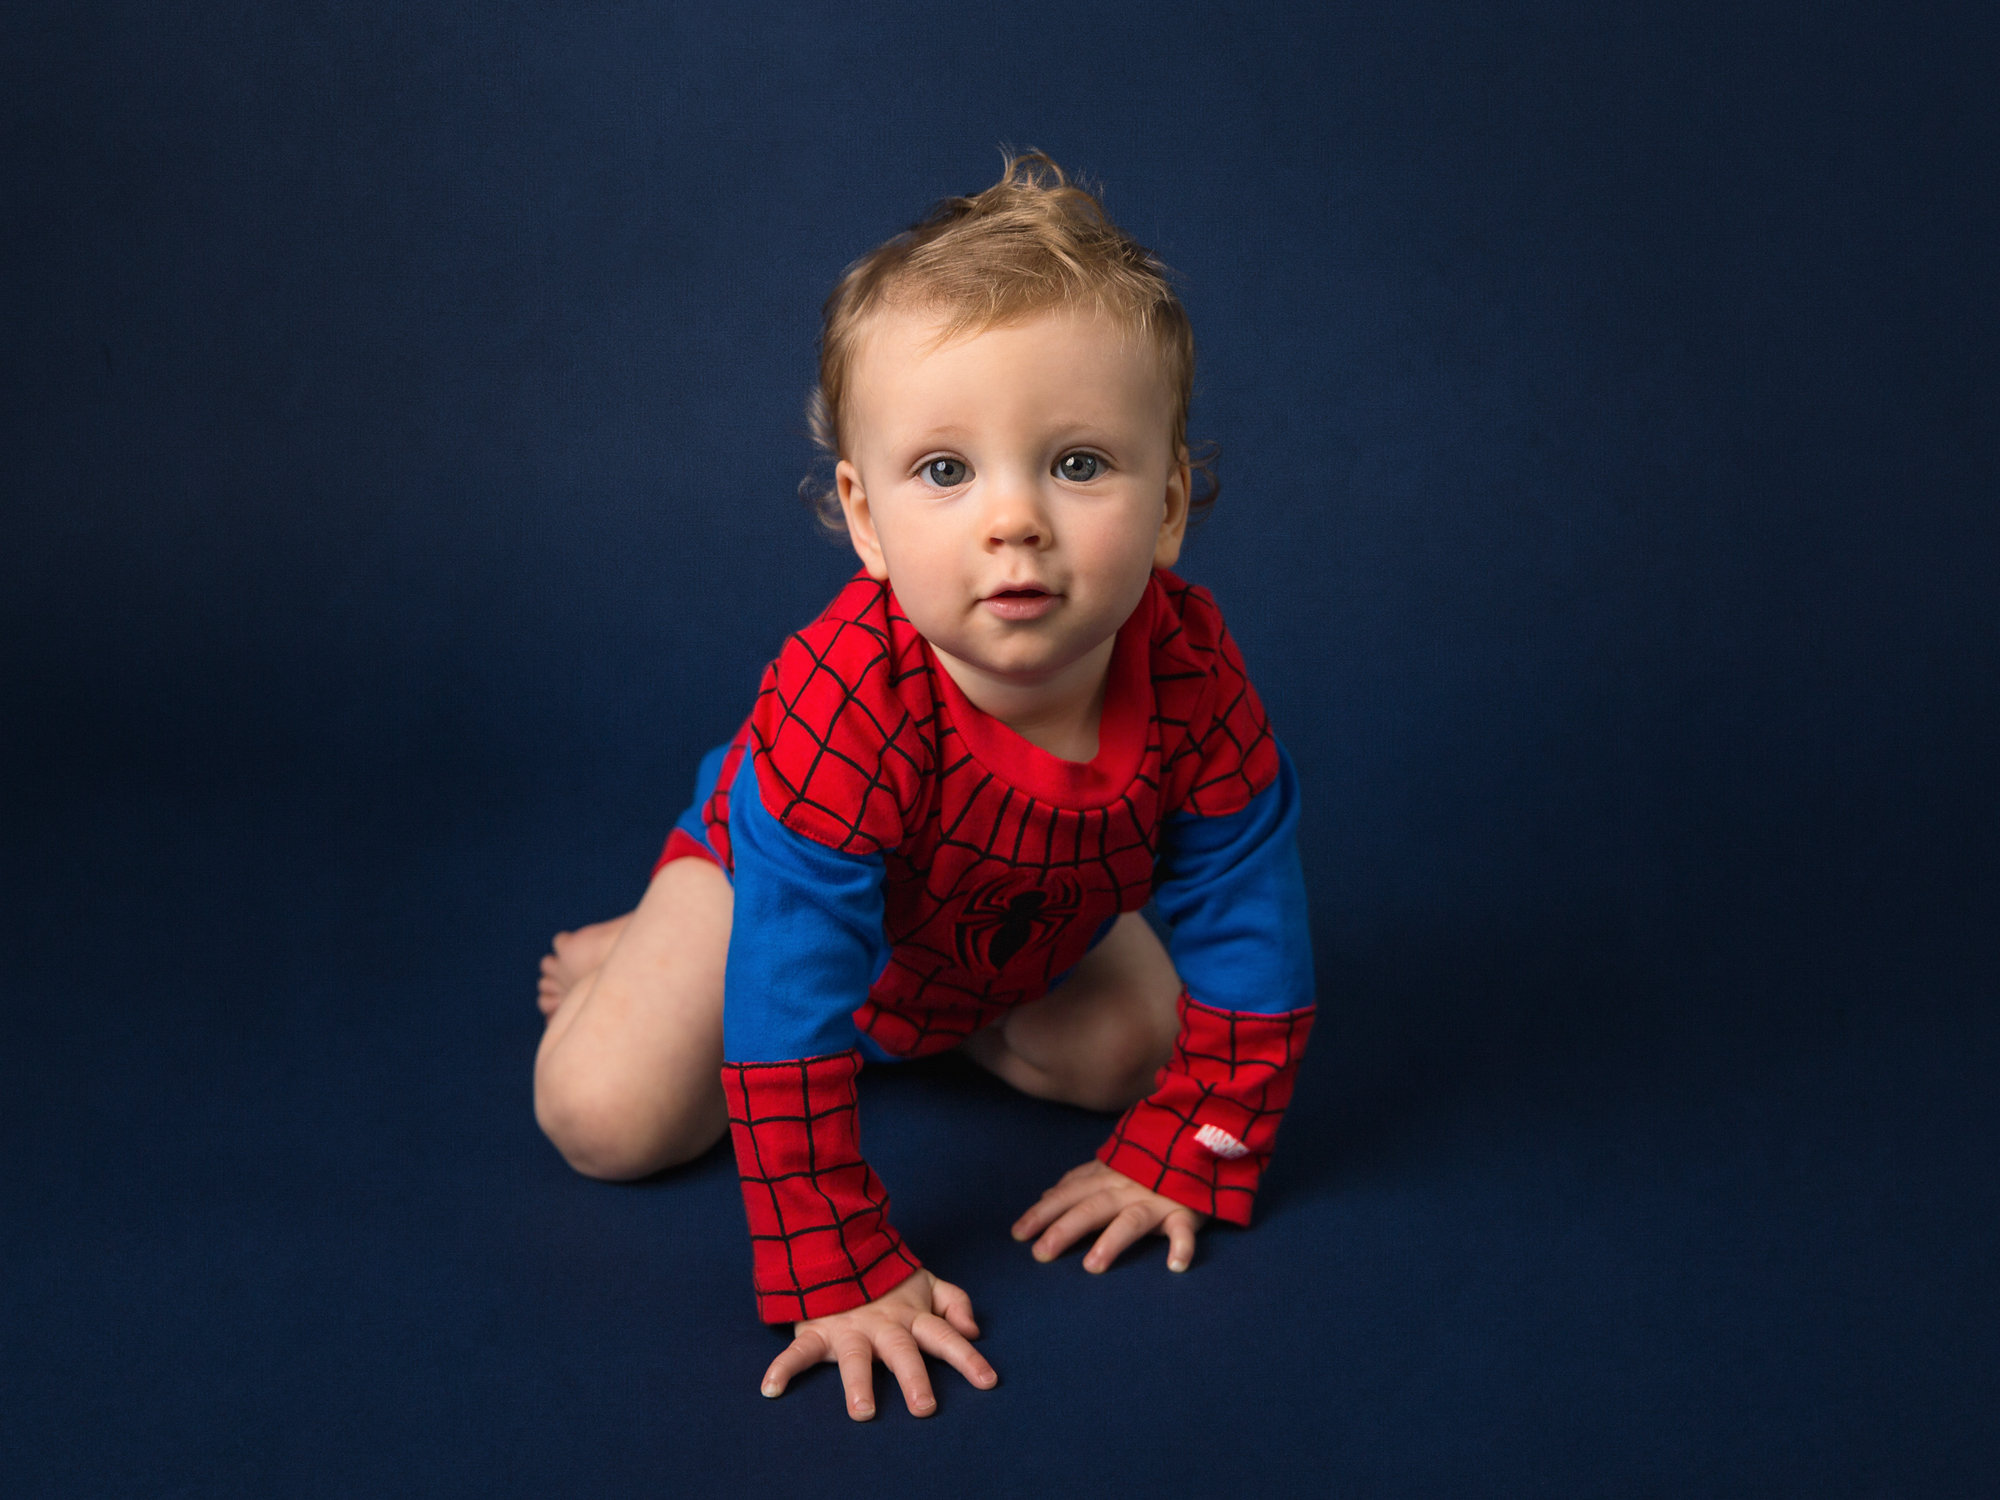 Superhero baby photoshoot in caerphilly, south wales near cardiff